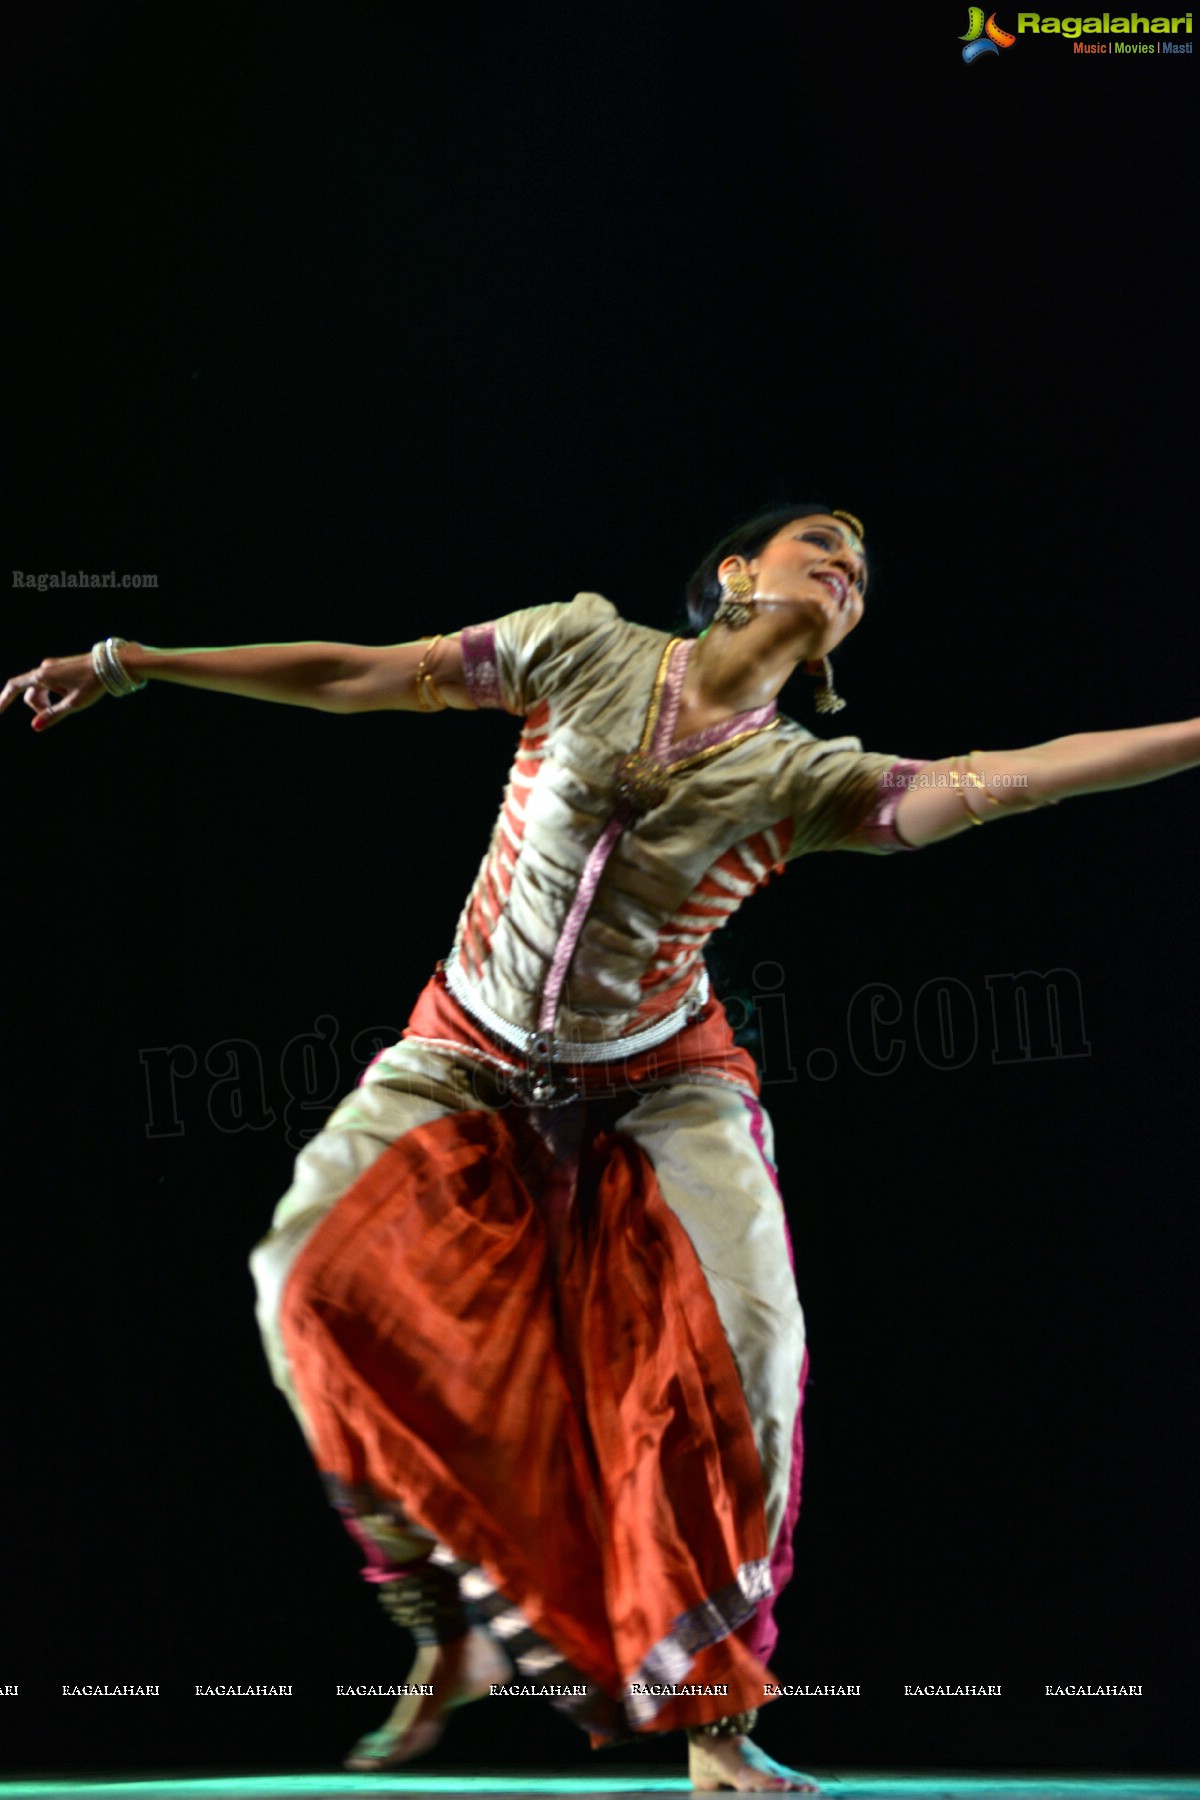 The Prophet: A Dance Theatre by Savitha Sastry